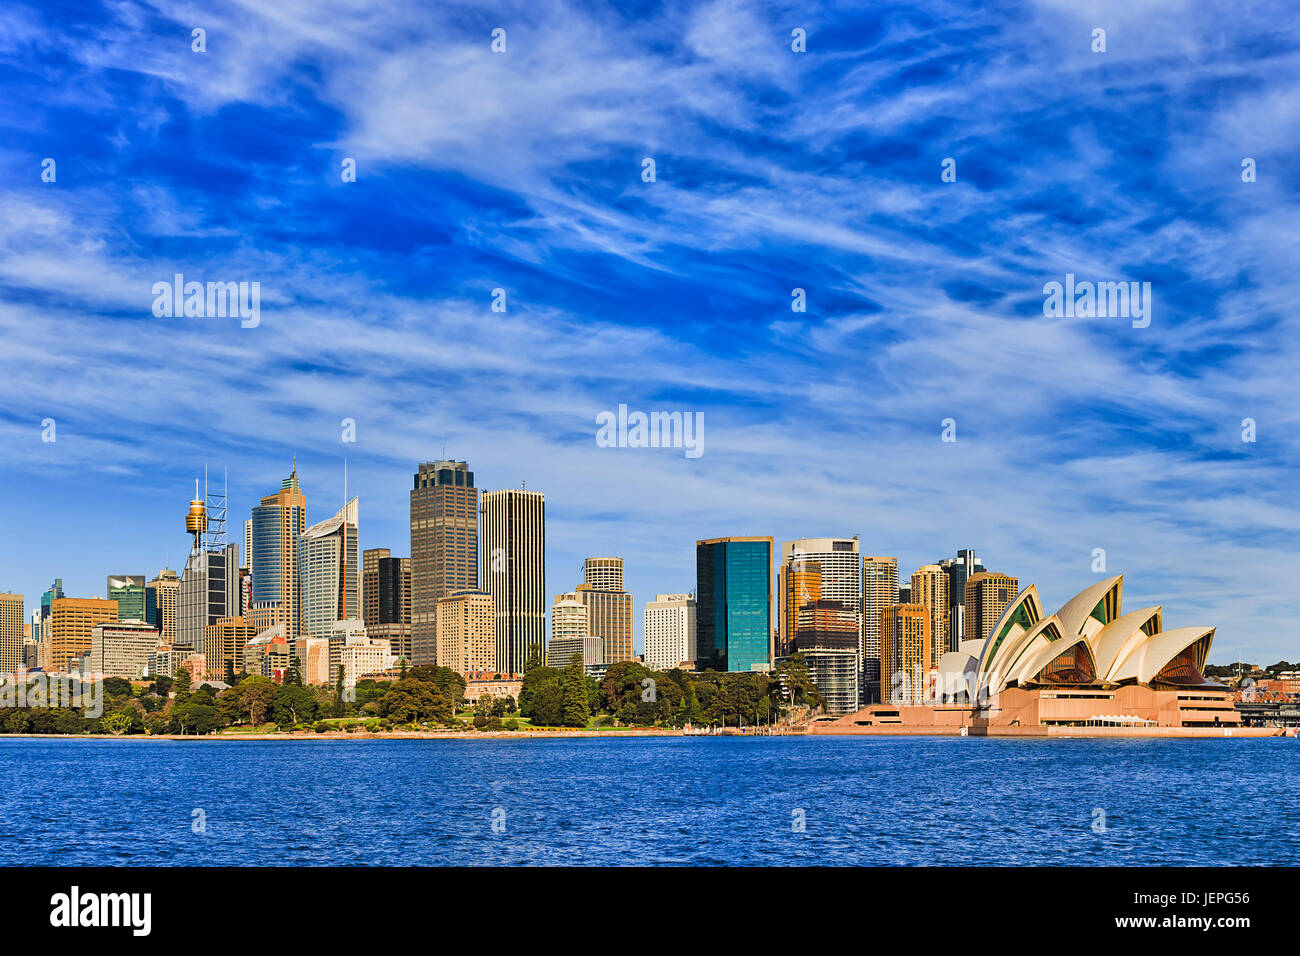 Cityscape of Sydney CBD across Royal Botanic gardens as seen from Sydney harbour ferry with blue water and sky. High-rise towers lit by bright warm su Stock Photo